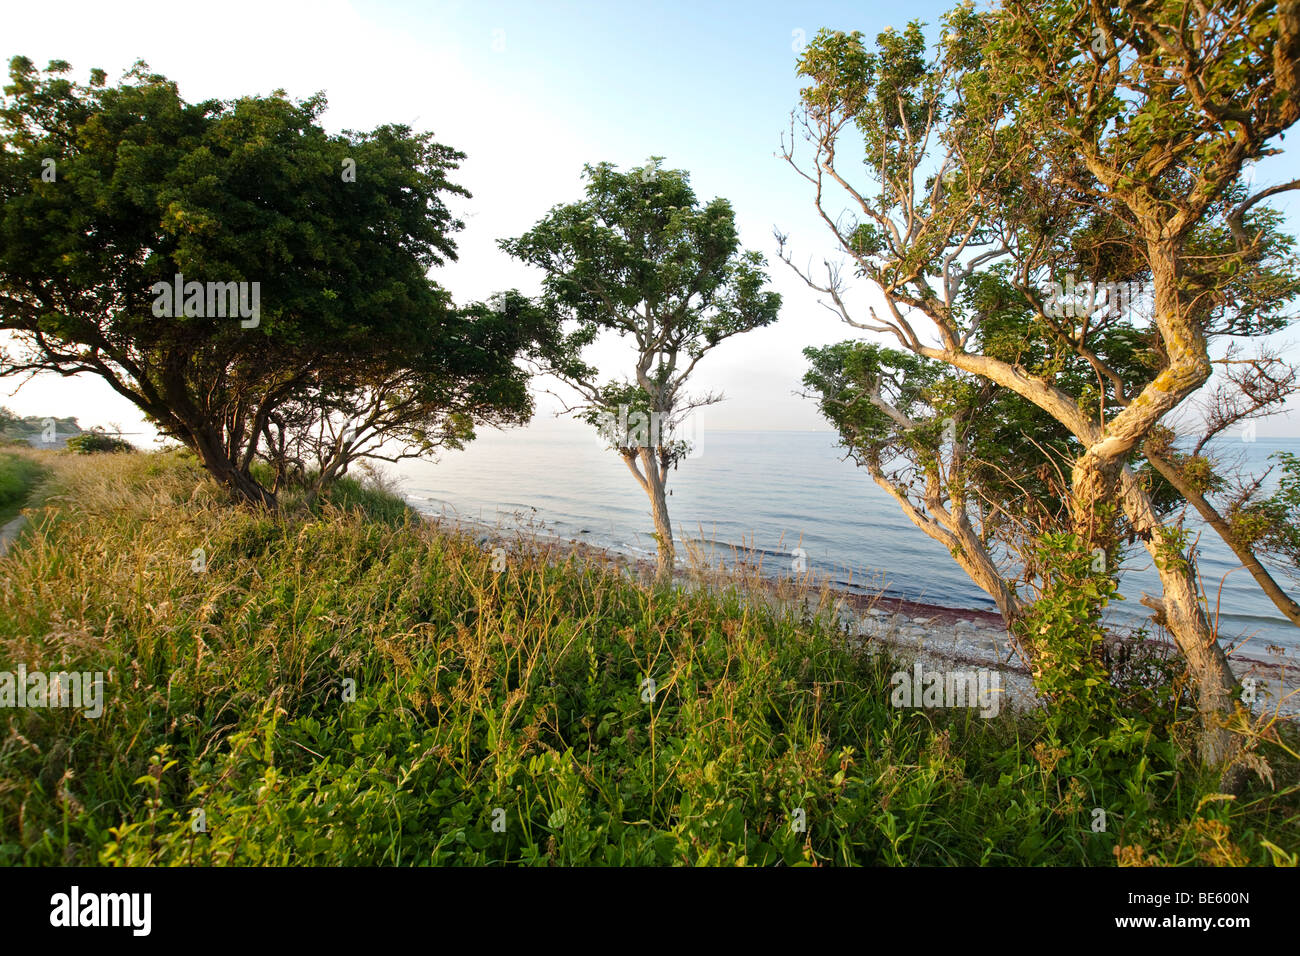 South coast of Fehmarn Island, with cripple oak trees in the foreground, Schleswig-Holstein, Germany, Europe Stock Photo